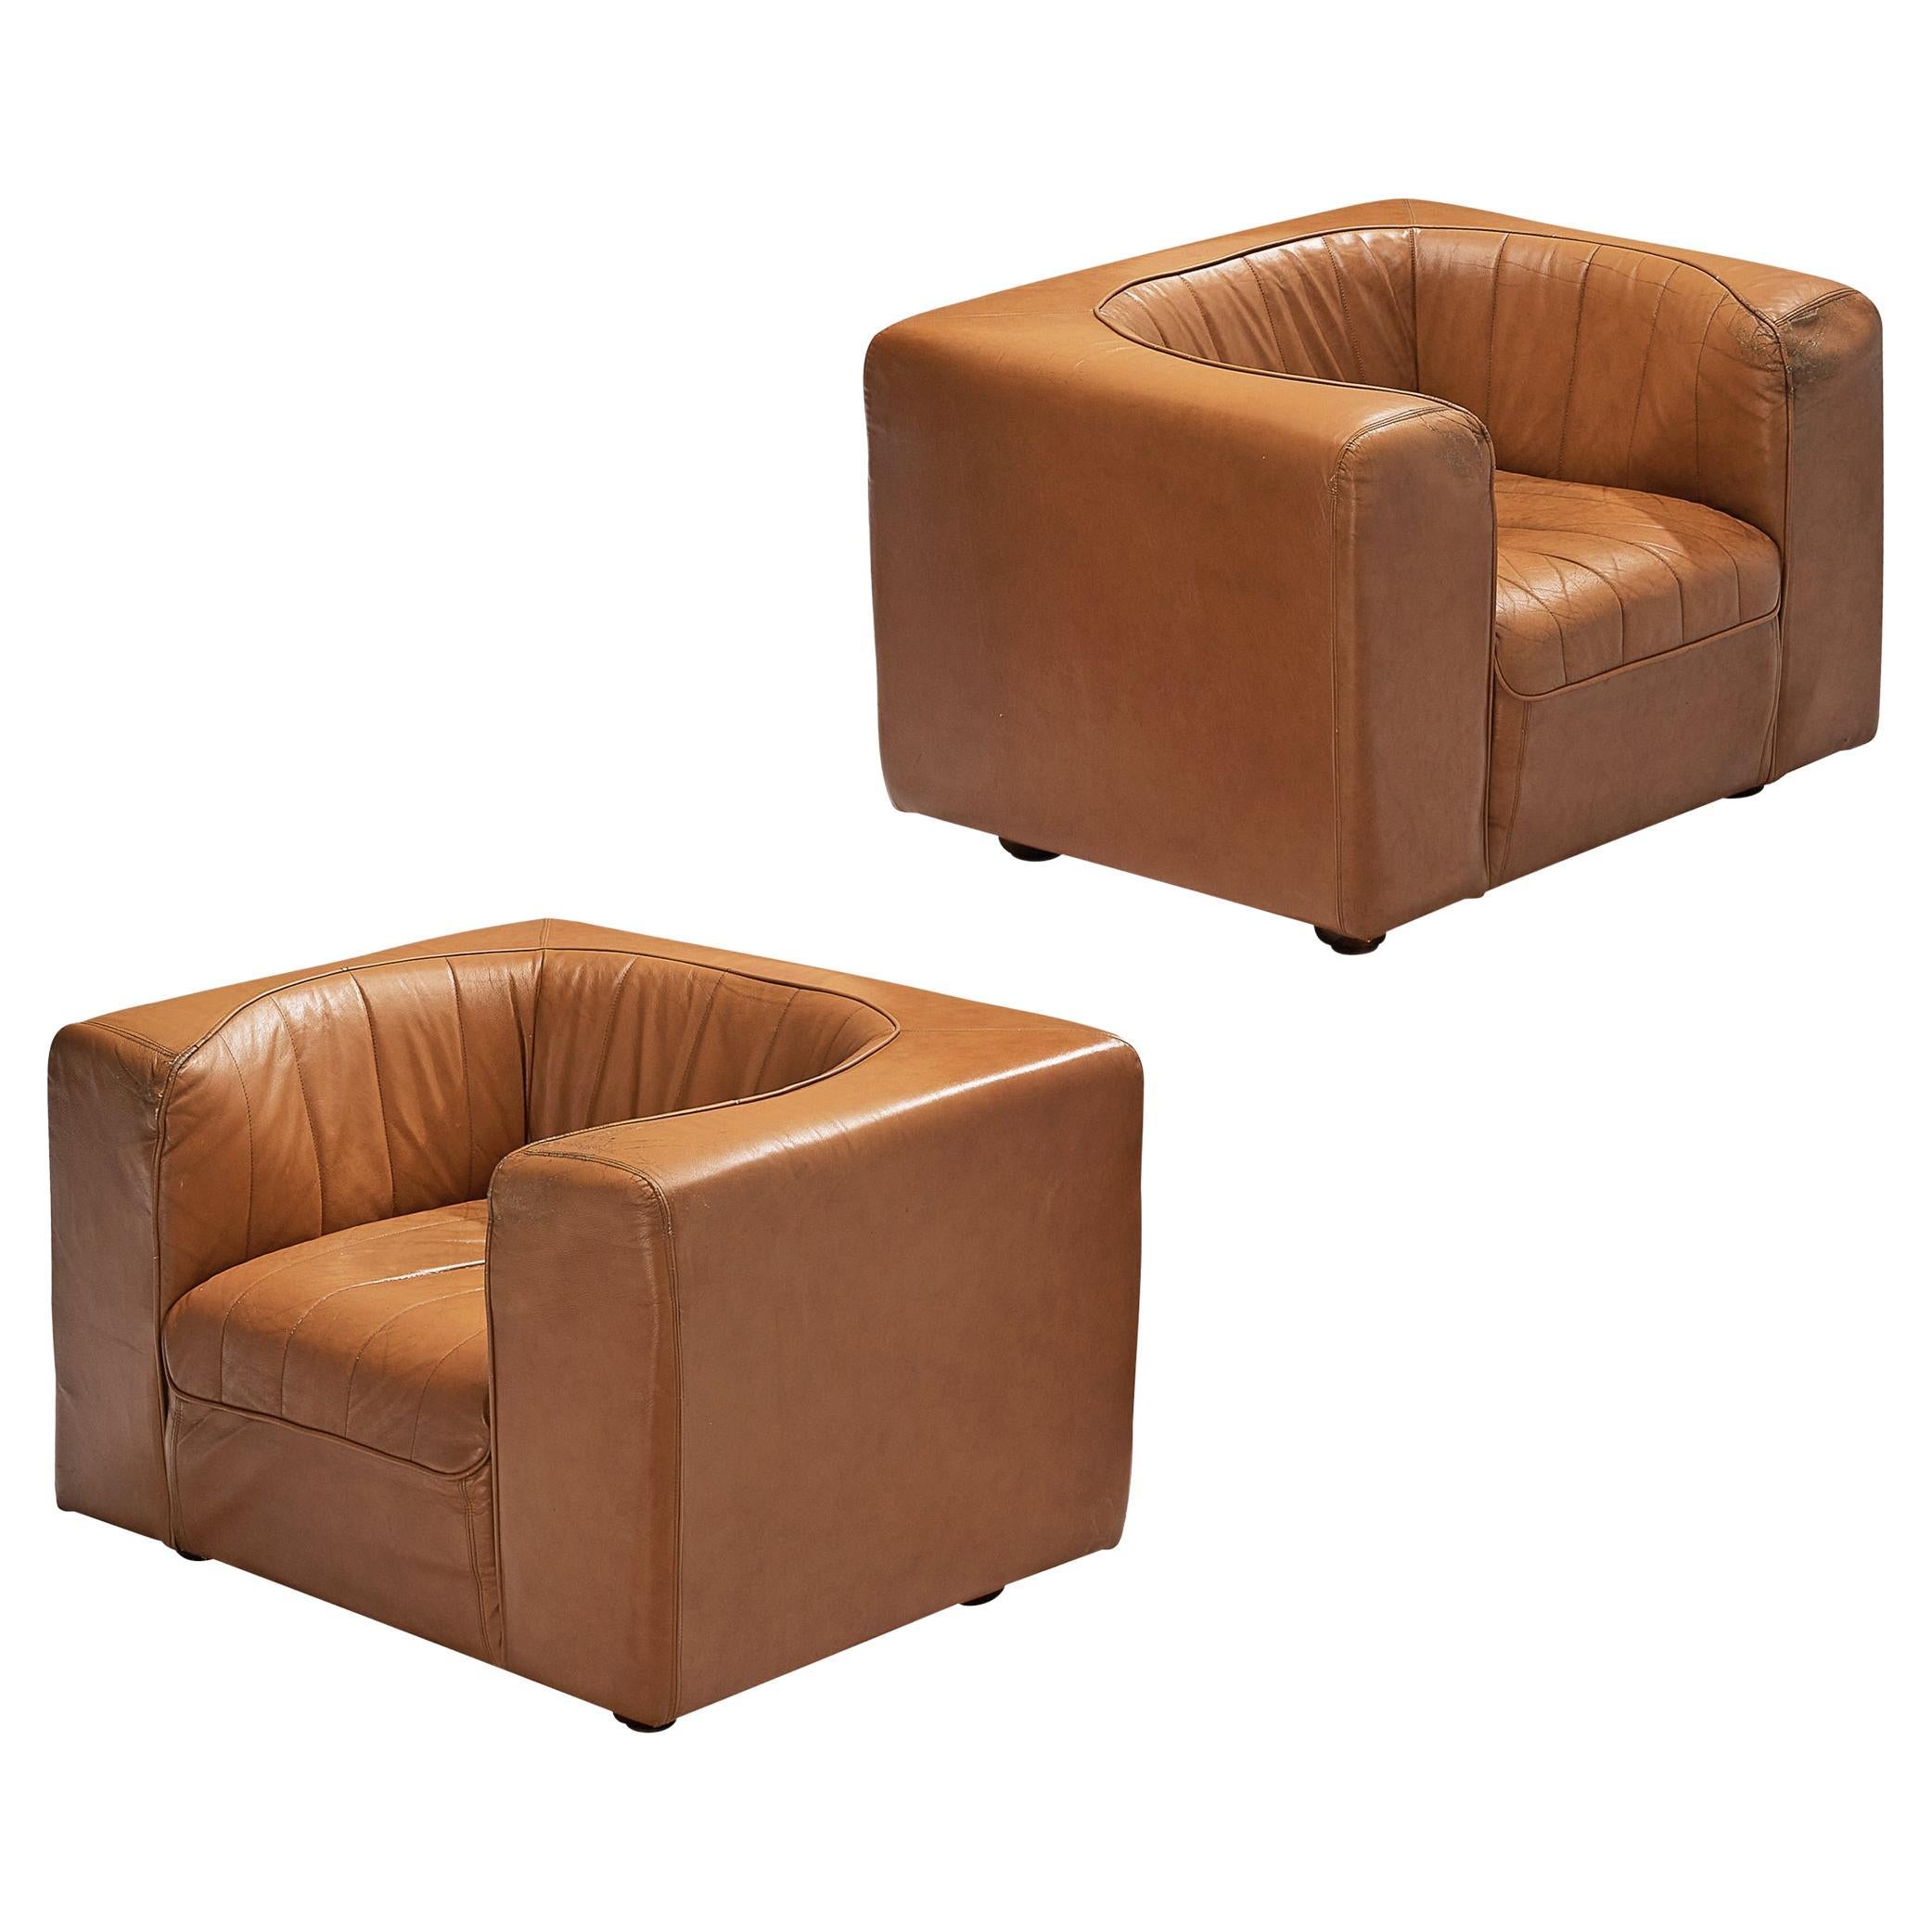 Tito Agnoli for Arflex Pair of Lounge Chairs in Cognac Leather